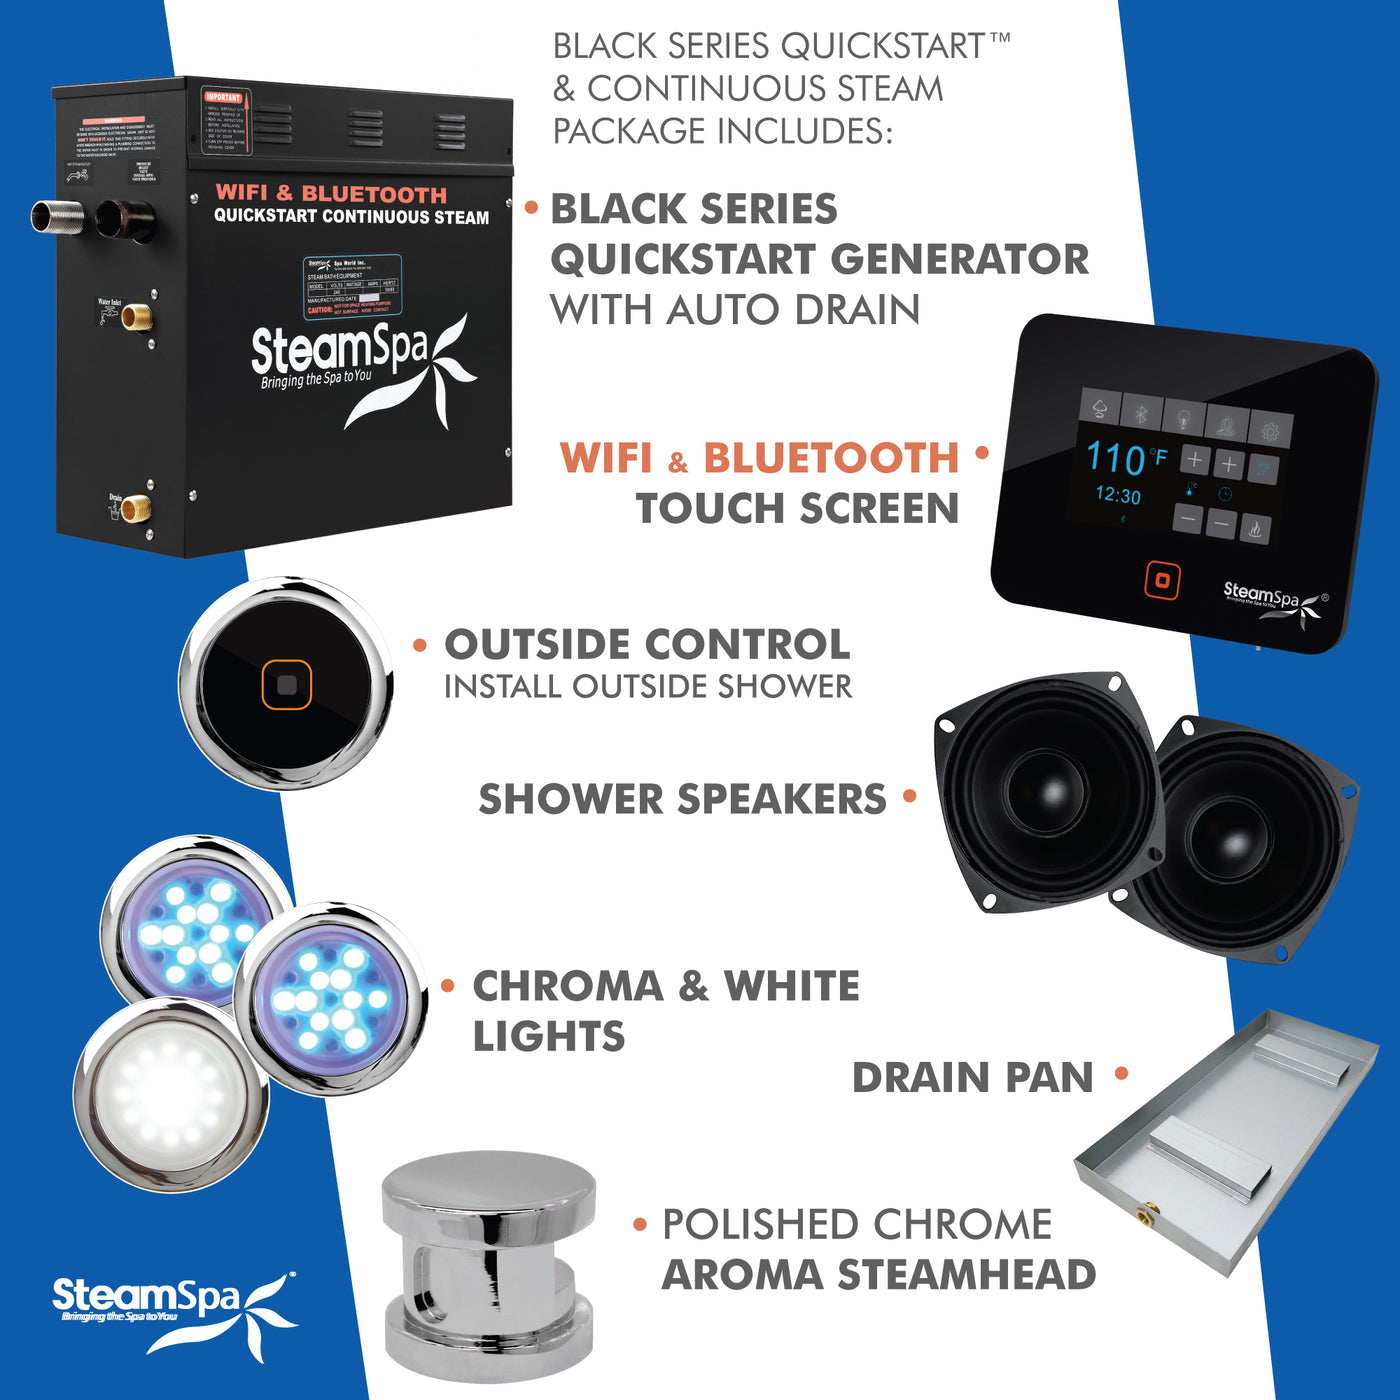 Black Series WiFi and Bluetooth 9kW QuickStart Steam Bath Generator Package with Dual Aroma Pump in Polished Chrome BKT900CH-ADP